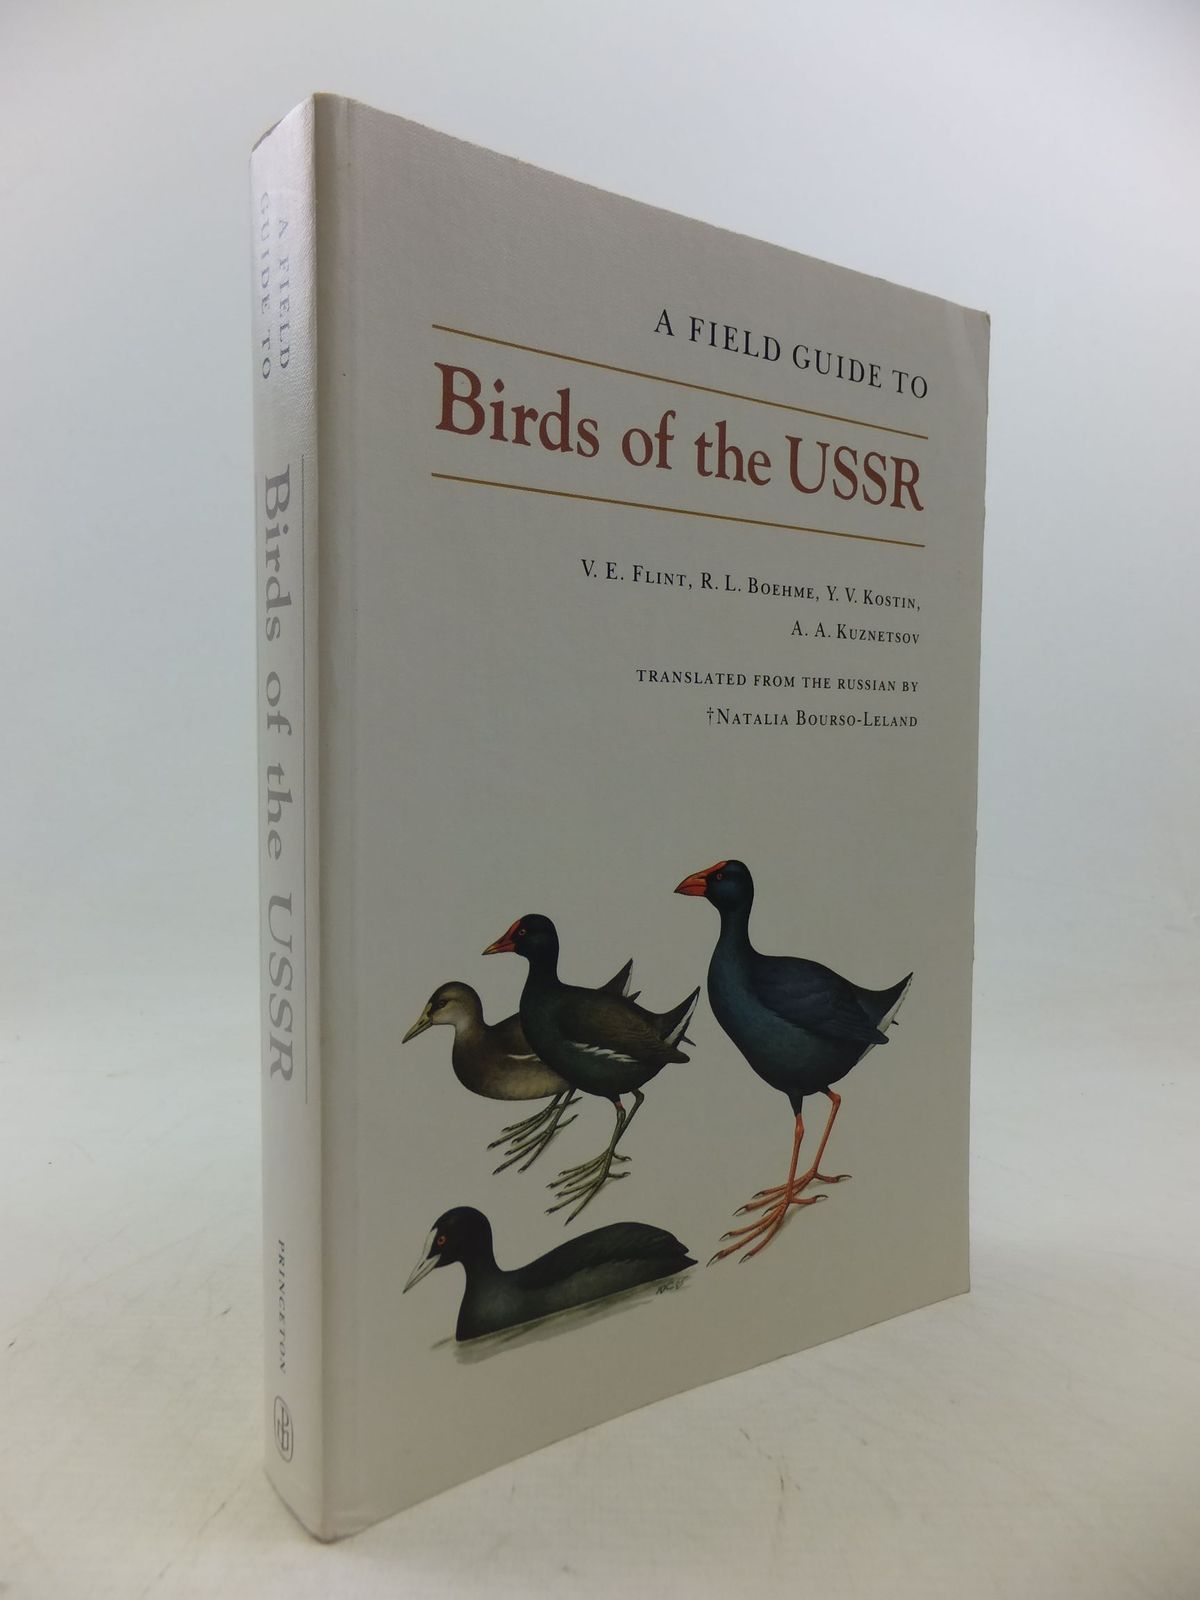 Photo of A FIELD GUIDE TO THE BIRDS OF THE USSR written by Flint, V.E.
Boehme, R.L.
Kostin, Y.V.
Kuznetsov, A.A. illustrated by Kostin, Y.V. published by Princeton University Press (STOCK CODE: 2113734)  for sale by Stella & Rose's Books